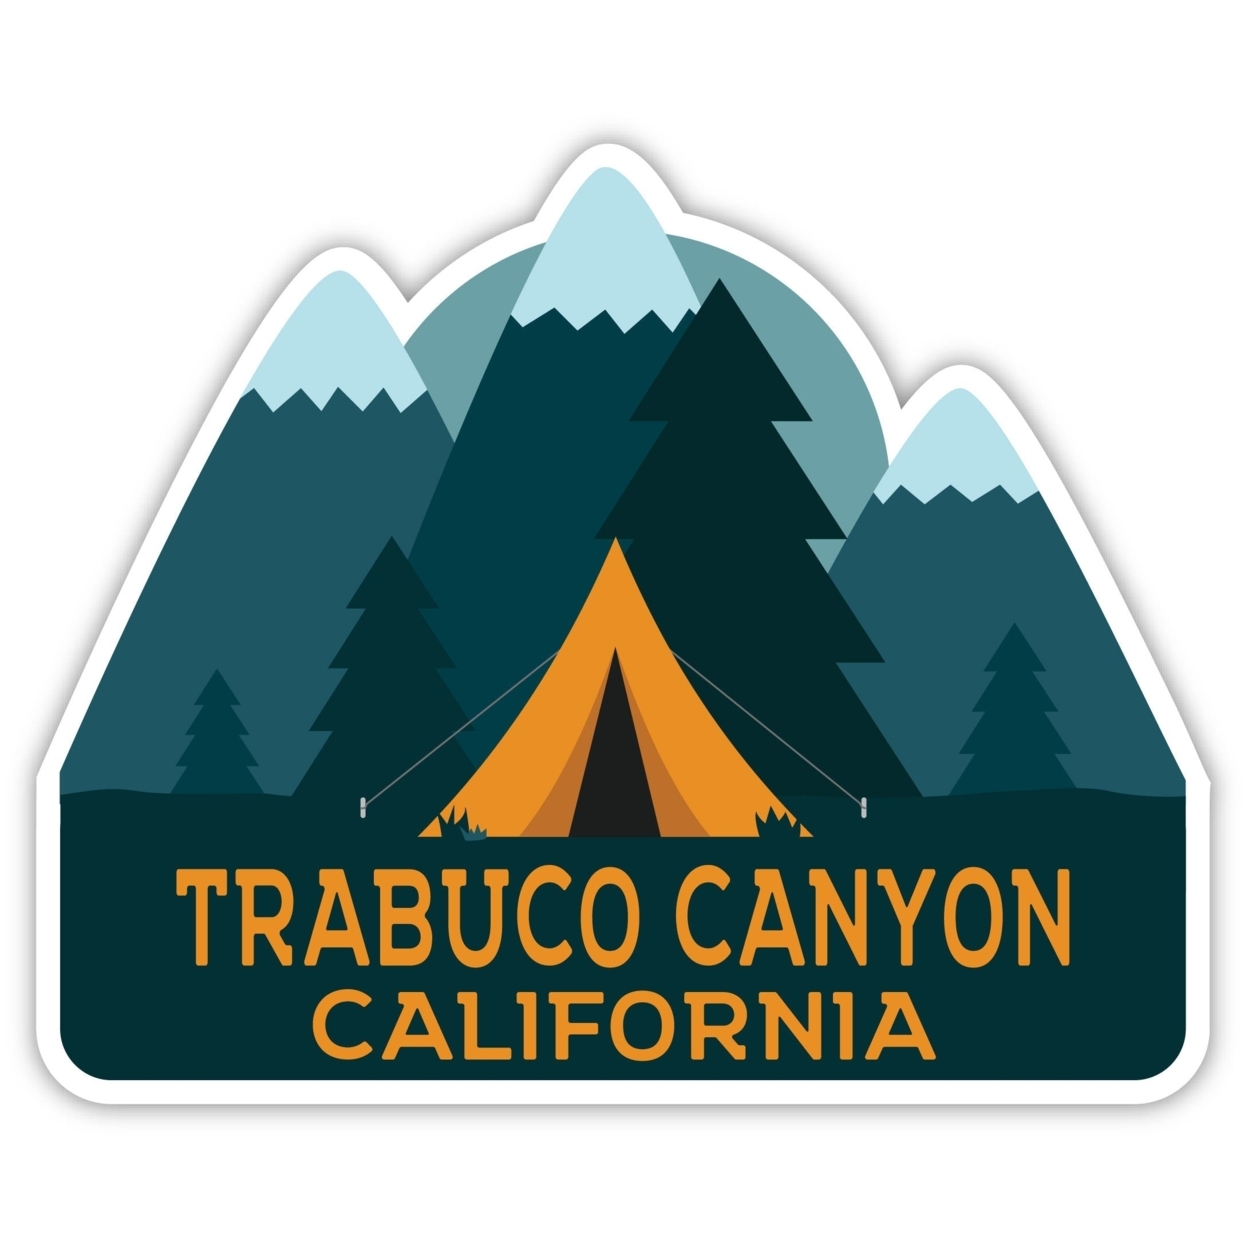 Trabuco Canyon California Souvenir Decorative Stickers (Choose Theme And Size) - Single Unit, 4-Inch, Great Outdoors